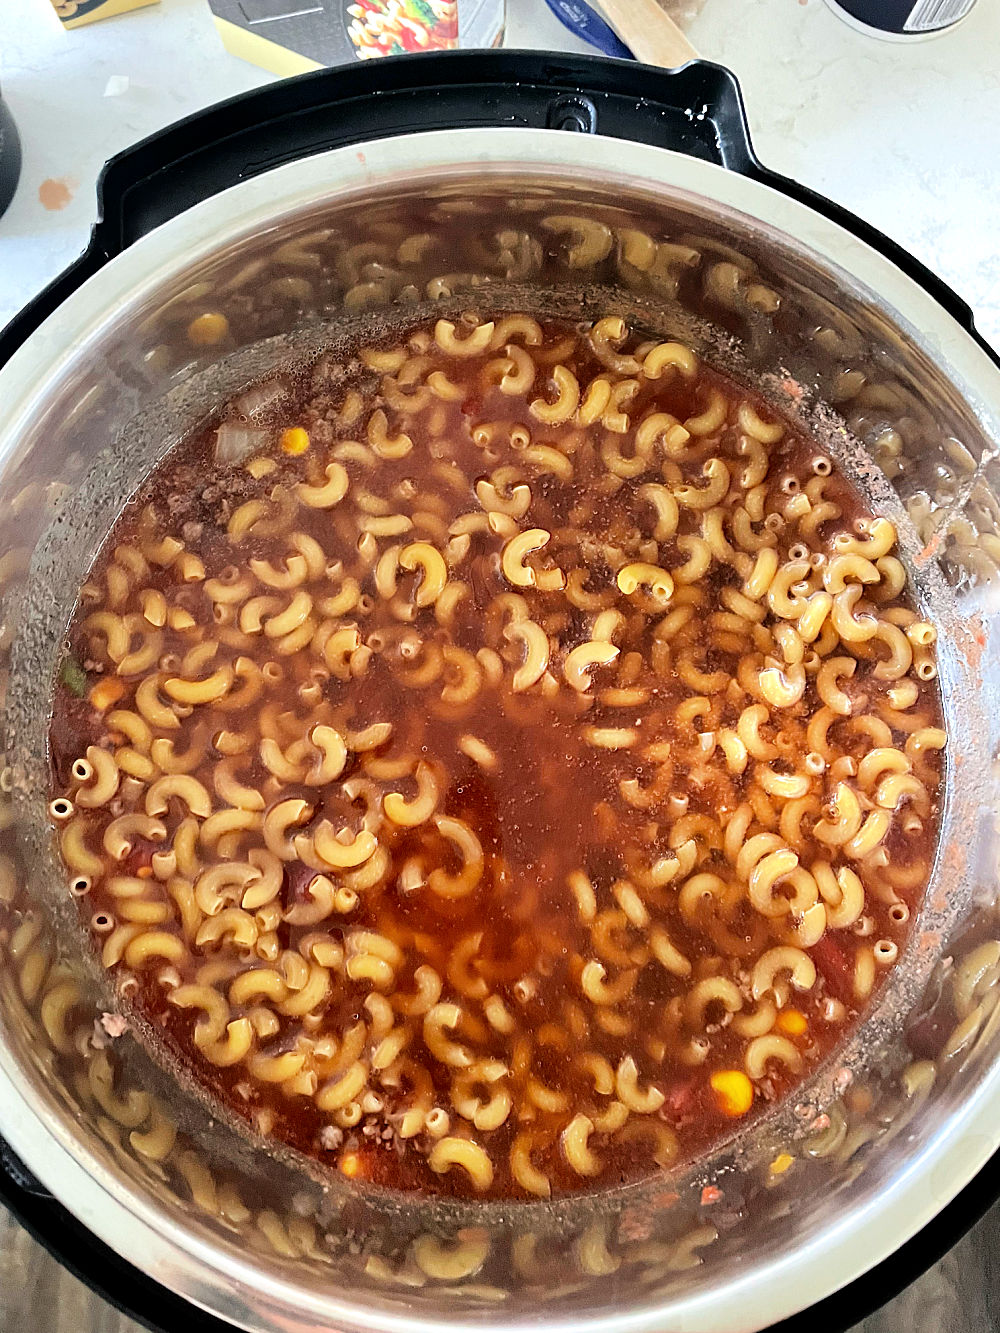 Adding Noodles to the rest of the ingredients in the instant pot